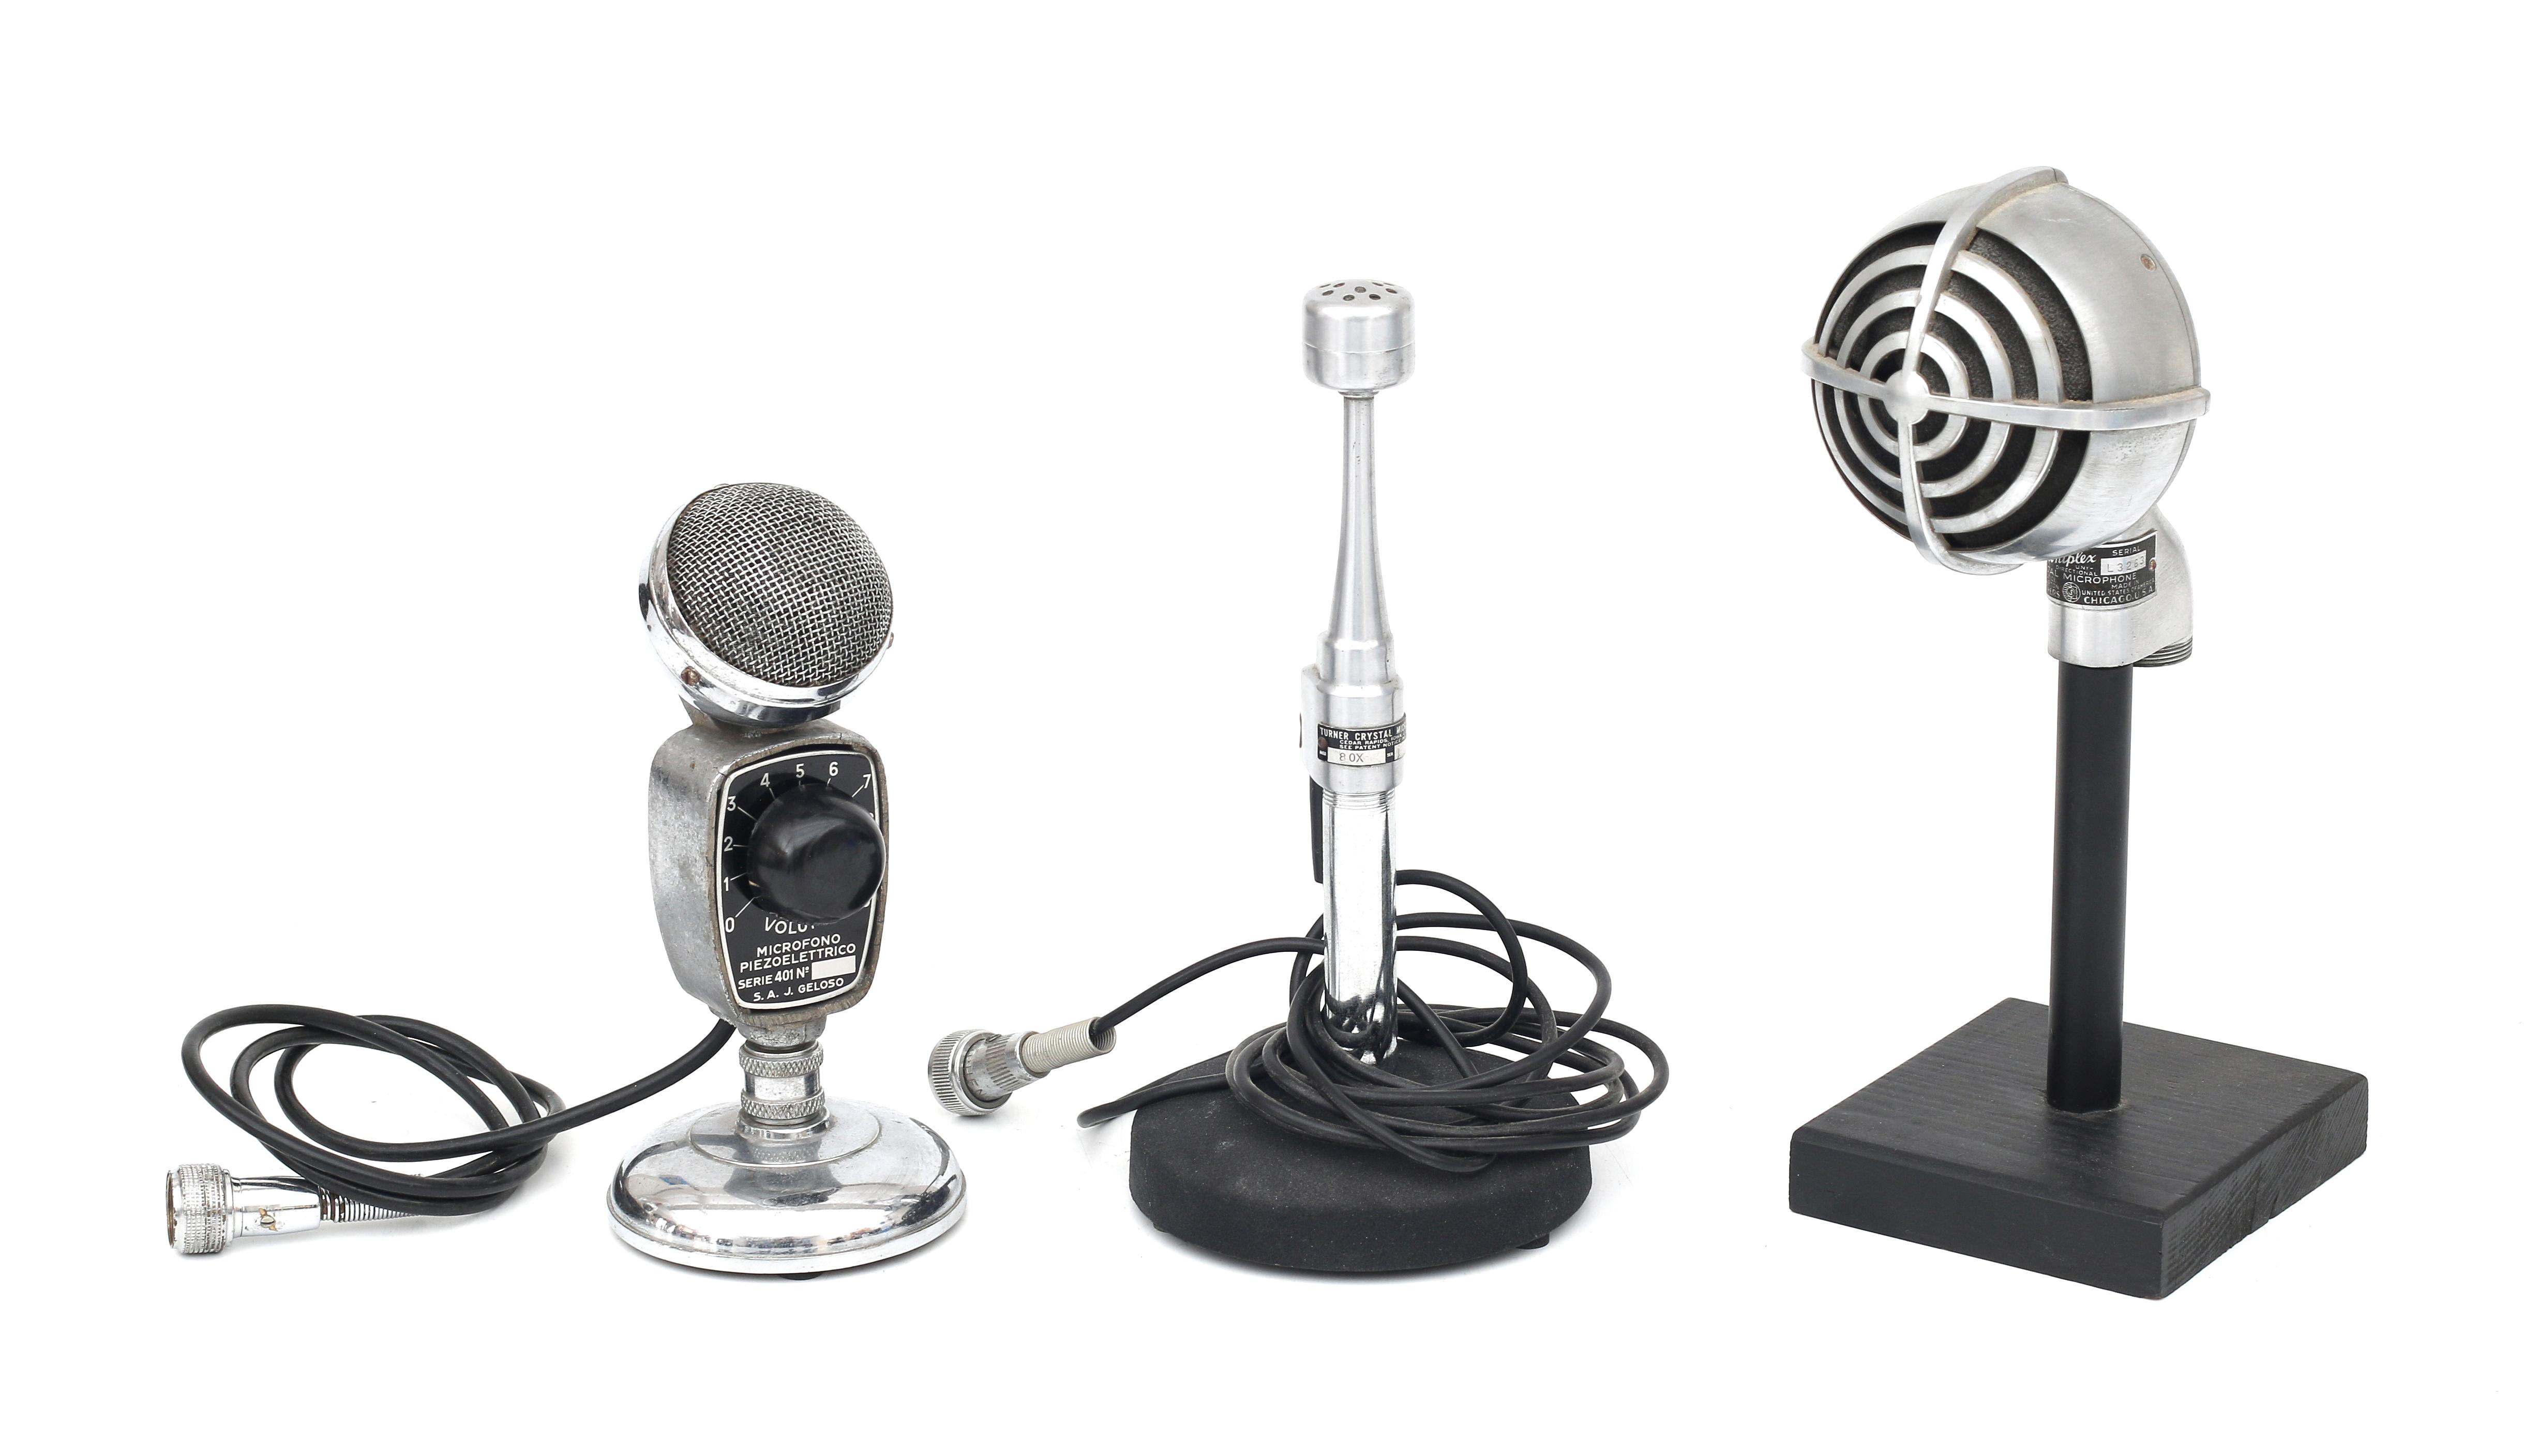 Three crystal-microphones: Geloso, type M401V, Shure, type 730A and Turner, type 80X. 